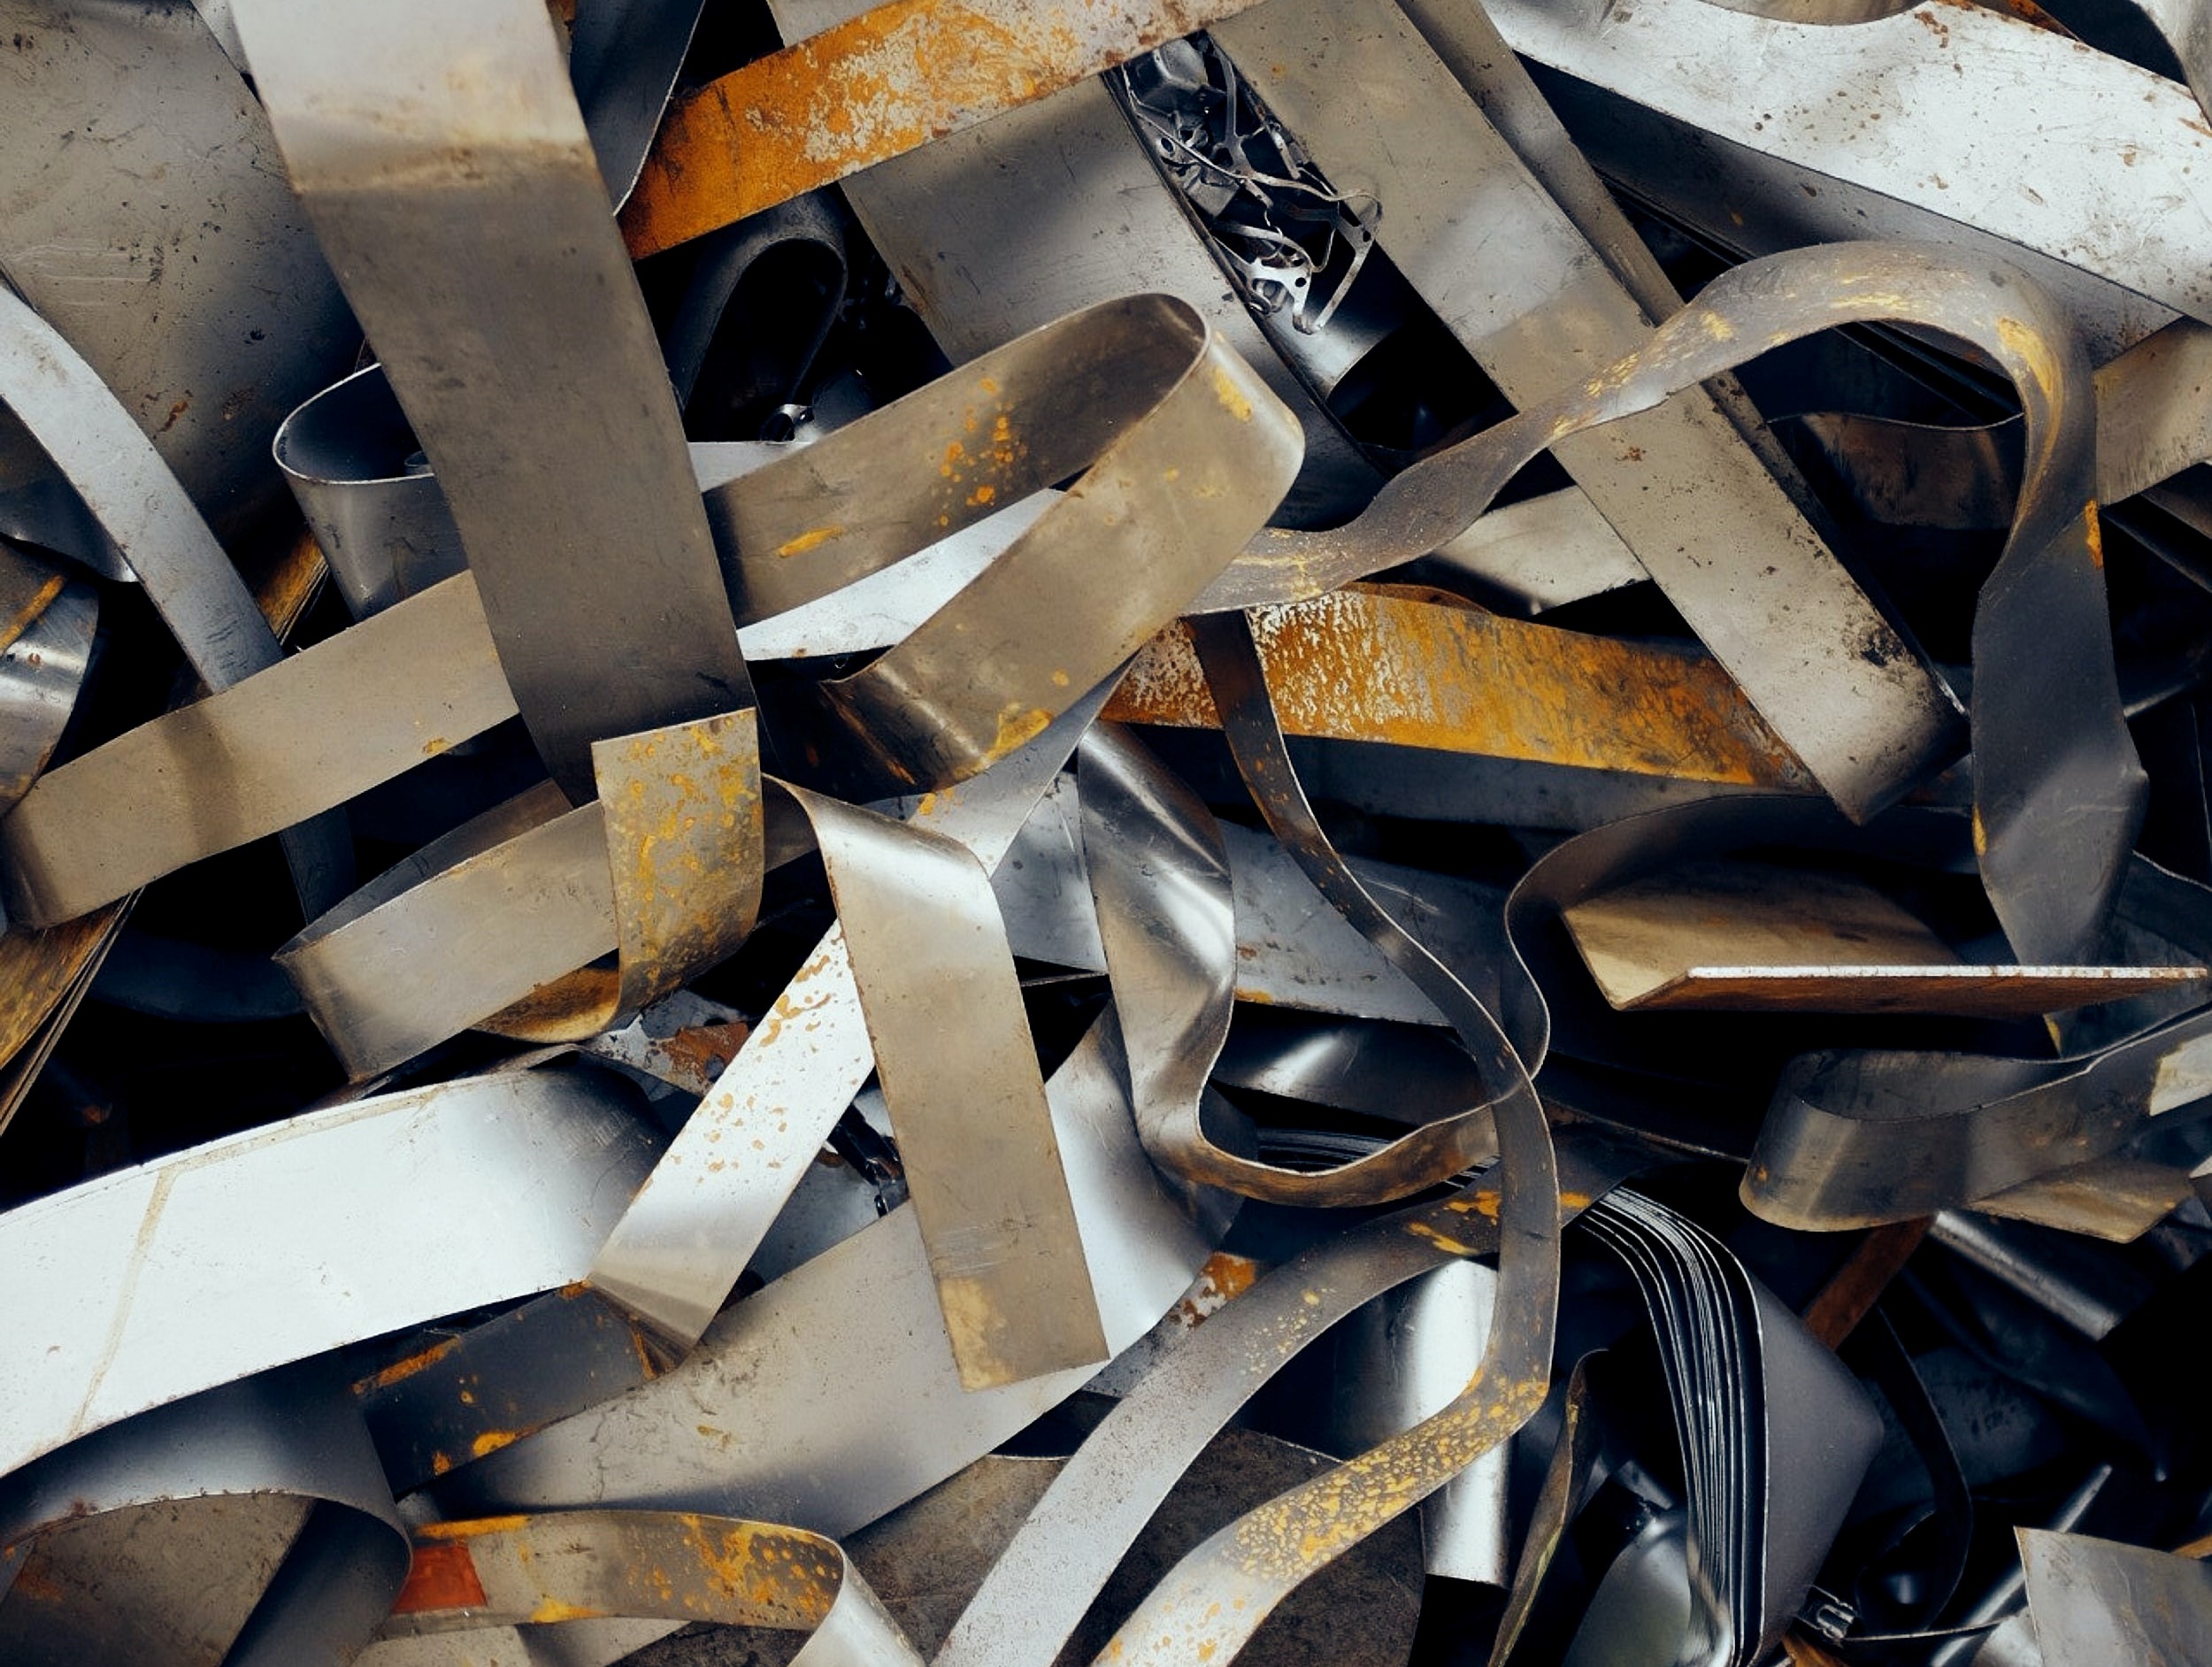 A pile of metal objects.